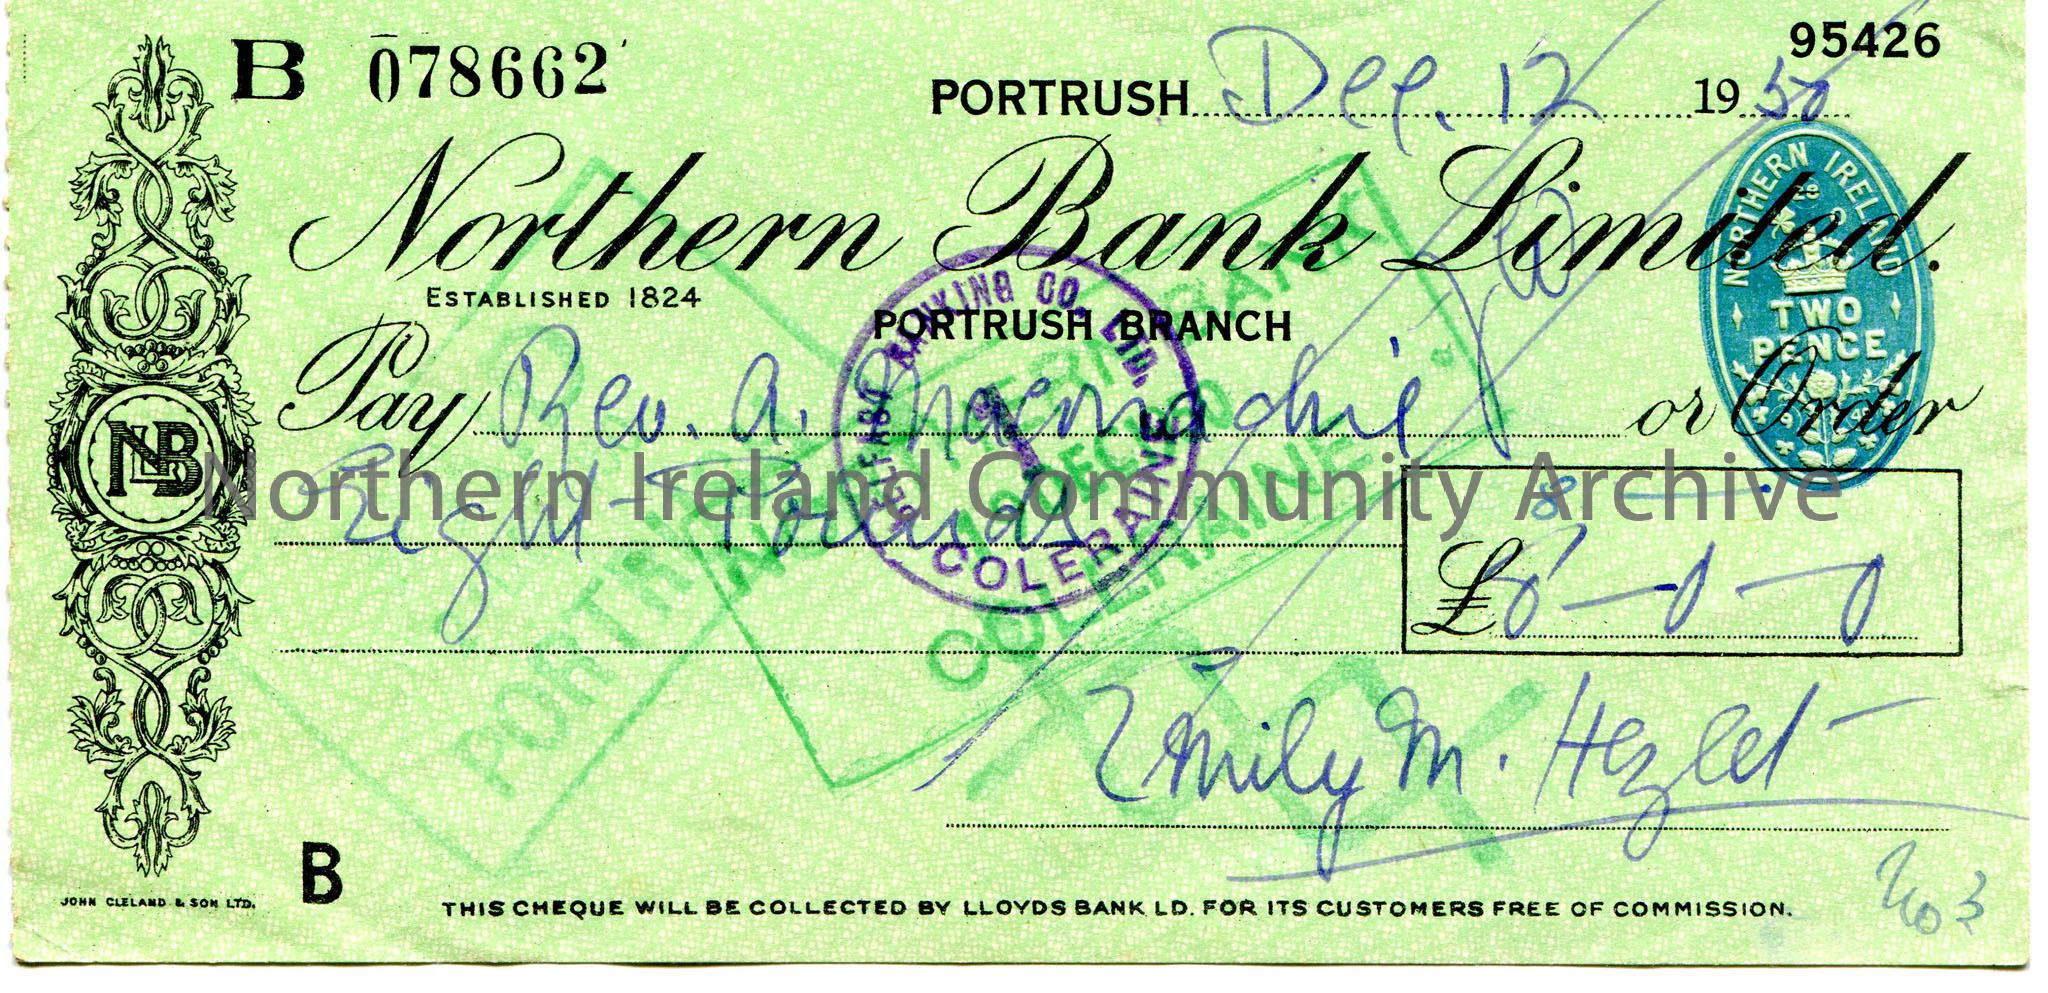 Northern Bank Limited, Portrush branch, cheque. Dated 12th December, 1950. Payable to Rev A. Macmachie from Emily M. Hezlet for £8.0.0. Scored ou…